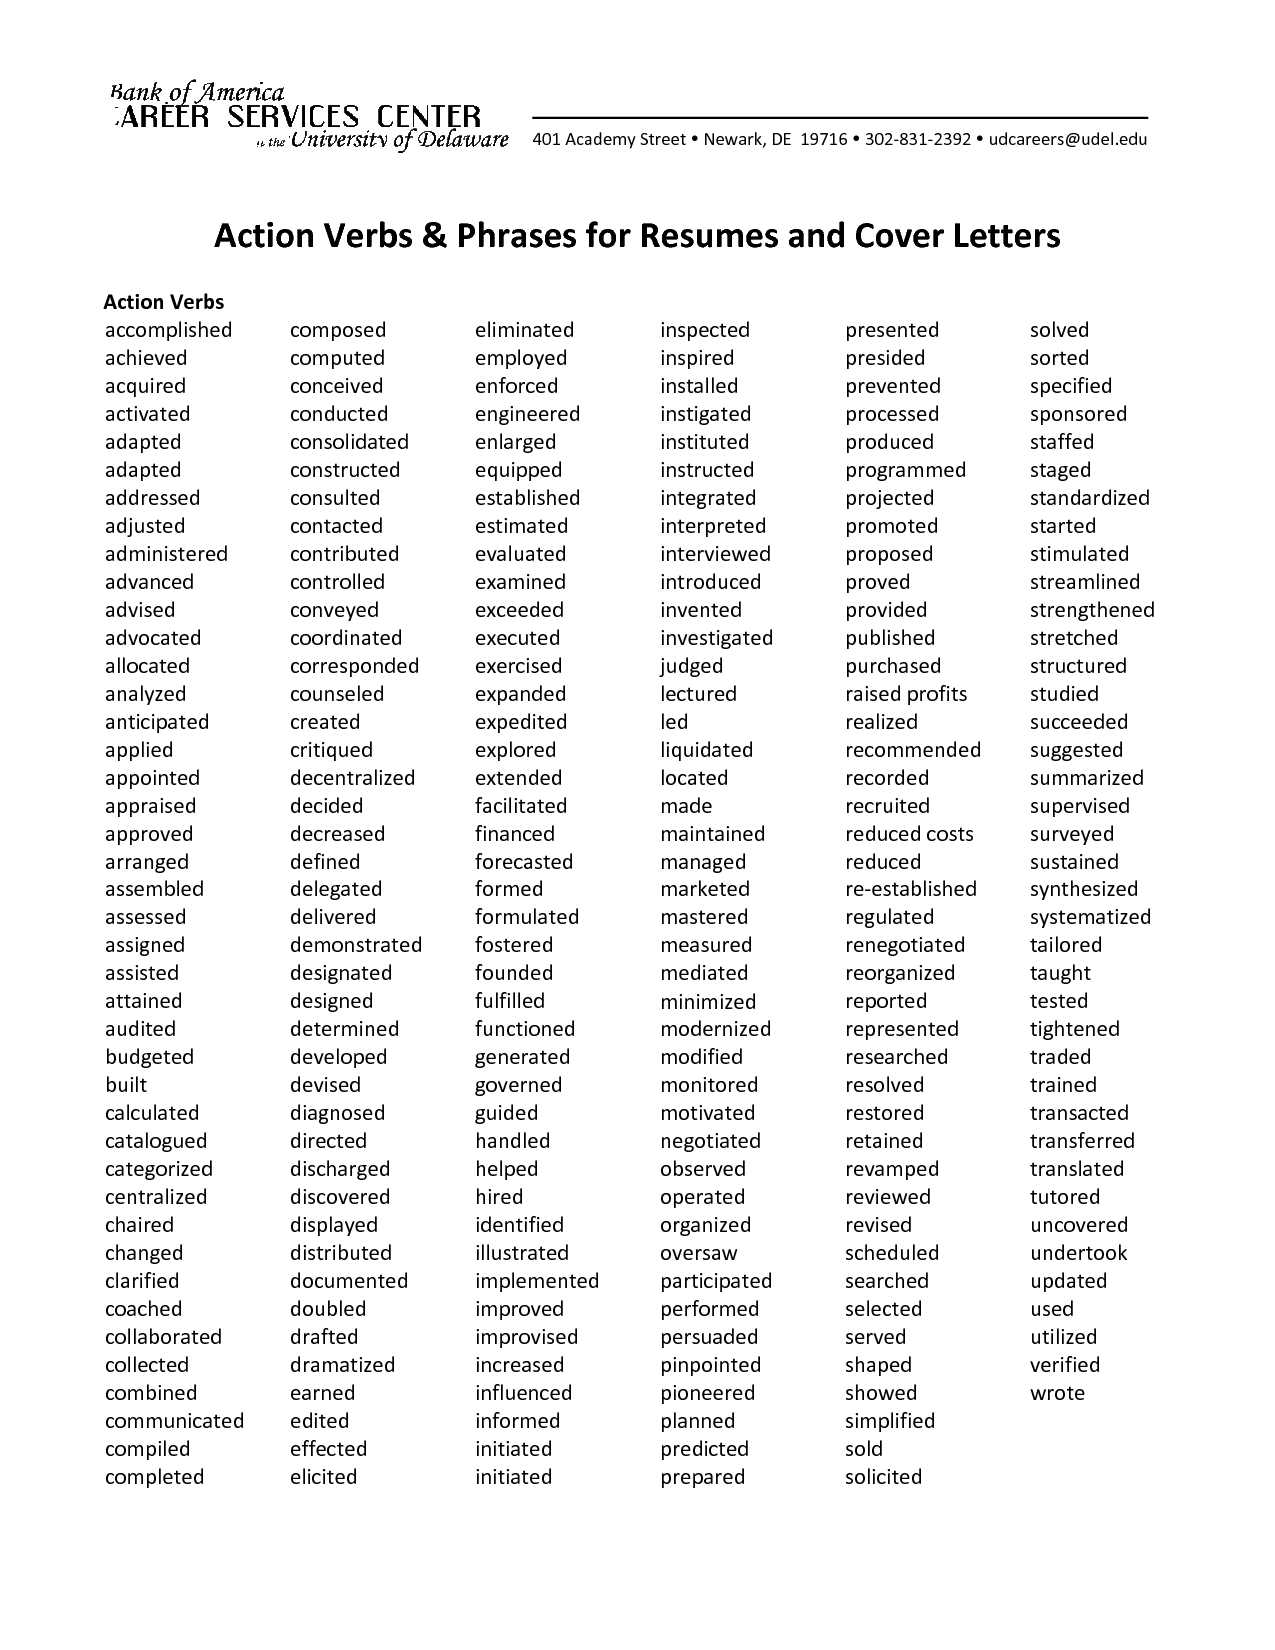 action verbs phrases for resumes and cover letters things i like